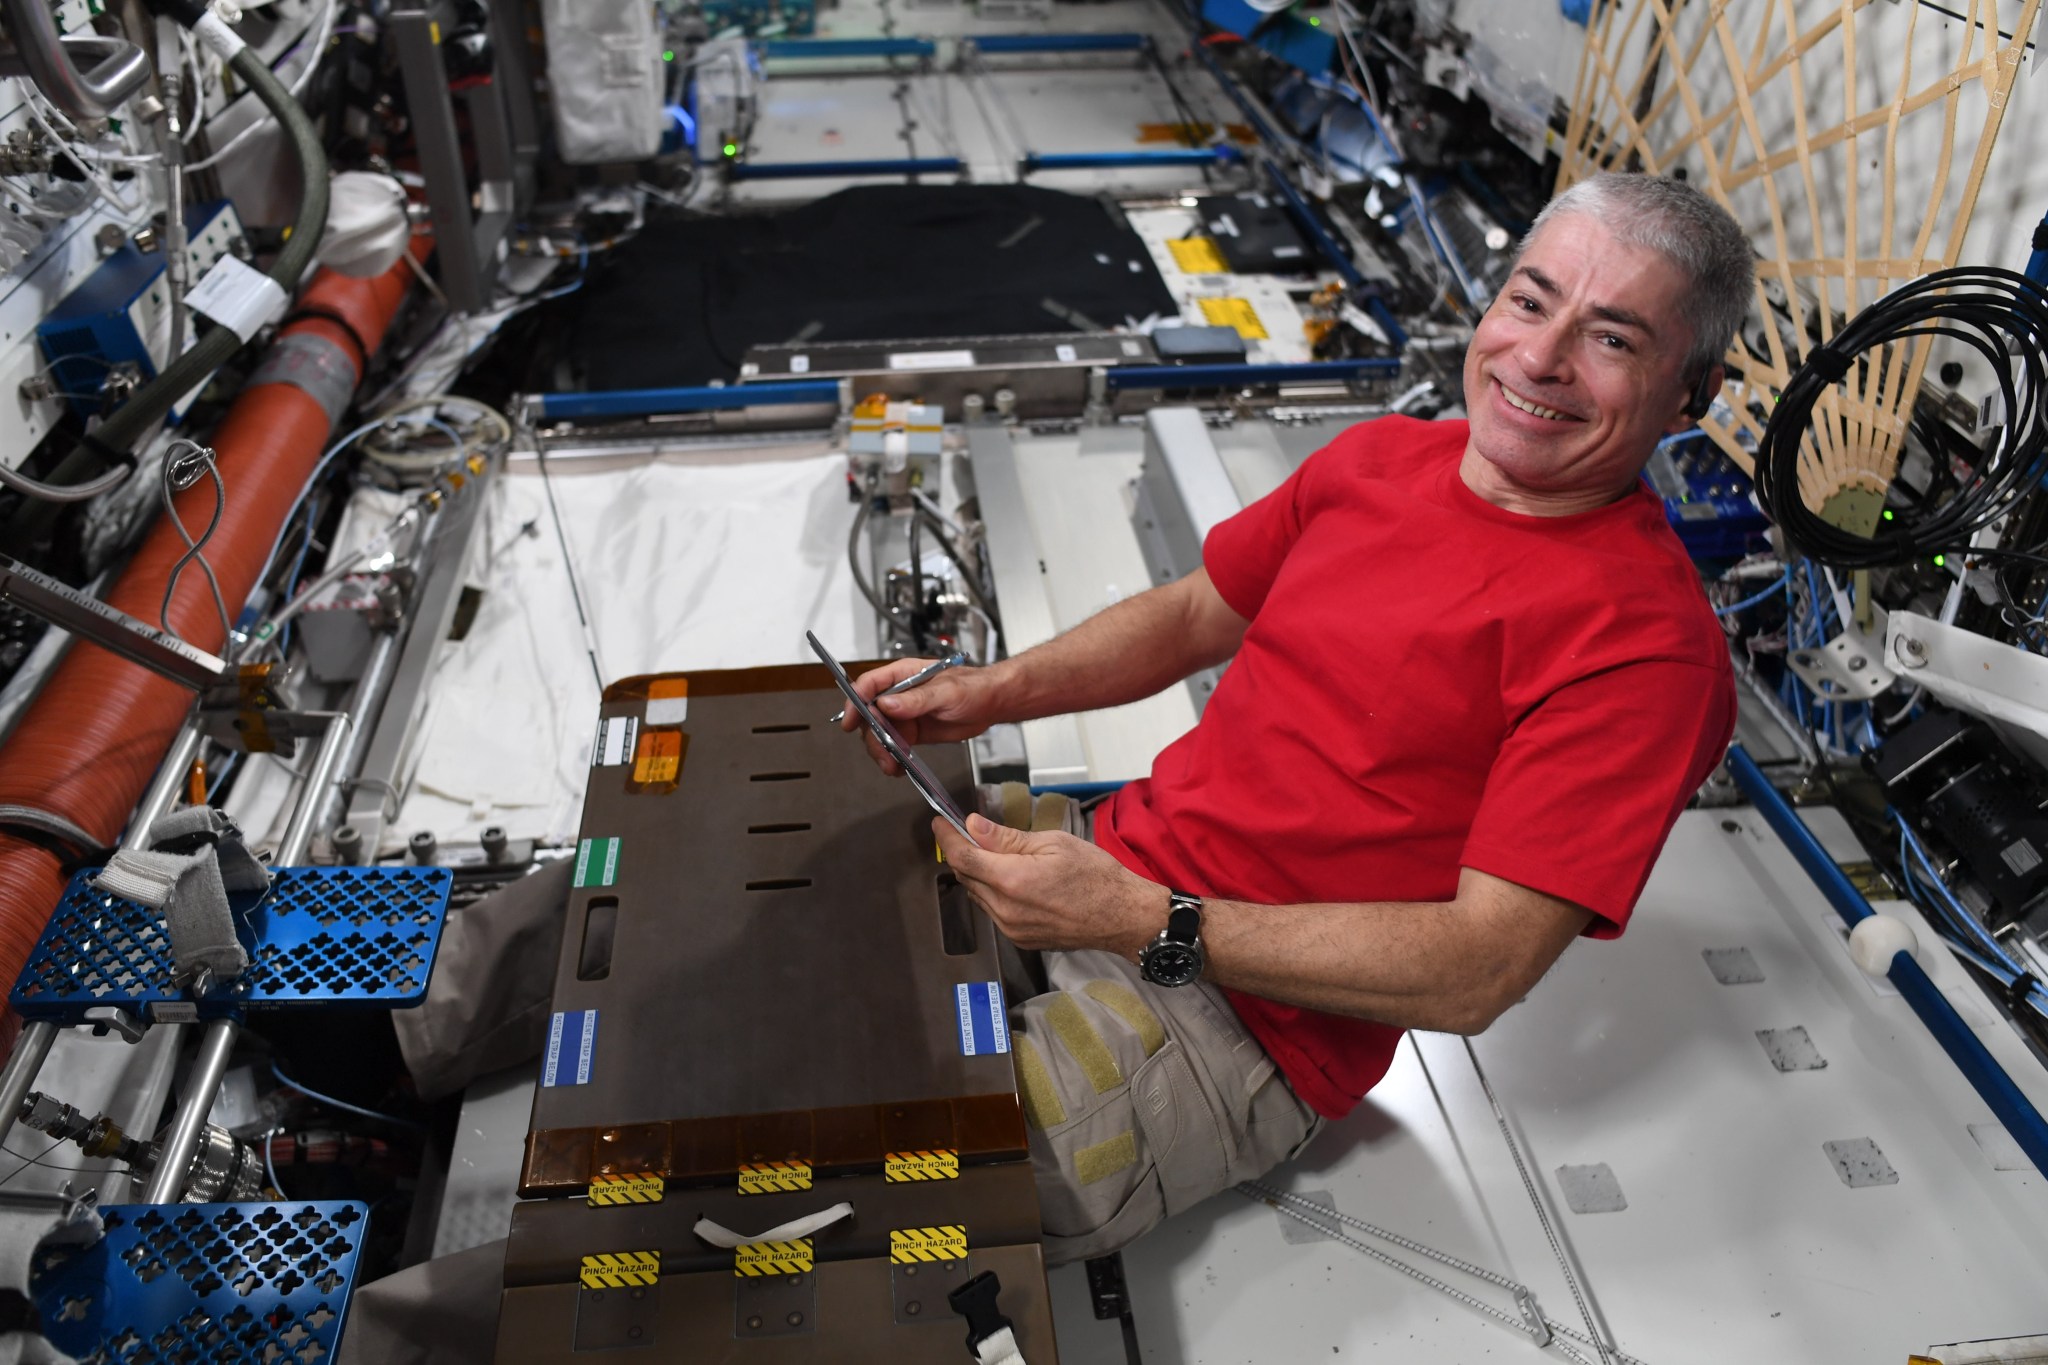 NASA astronaut Mark Vande Hei squeezes in time to unwind with a book. Vande Hei himself will make it into record books: He’s expected to break the record for the most consecutive days in space by an American explorer before his mission ends. 